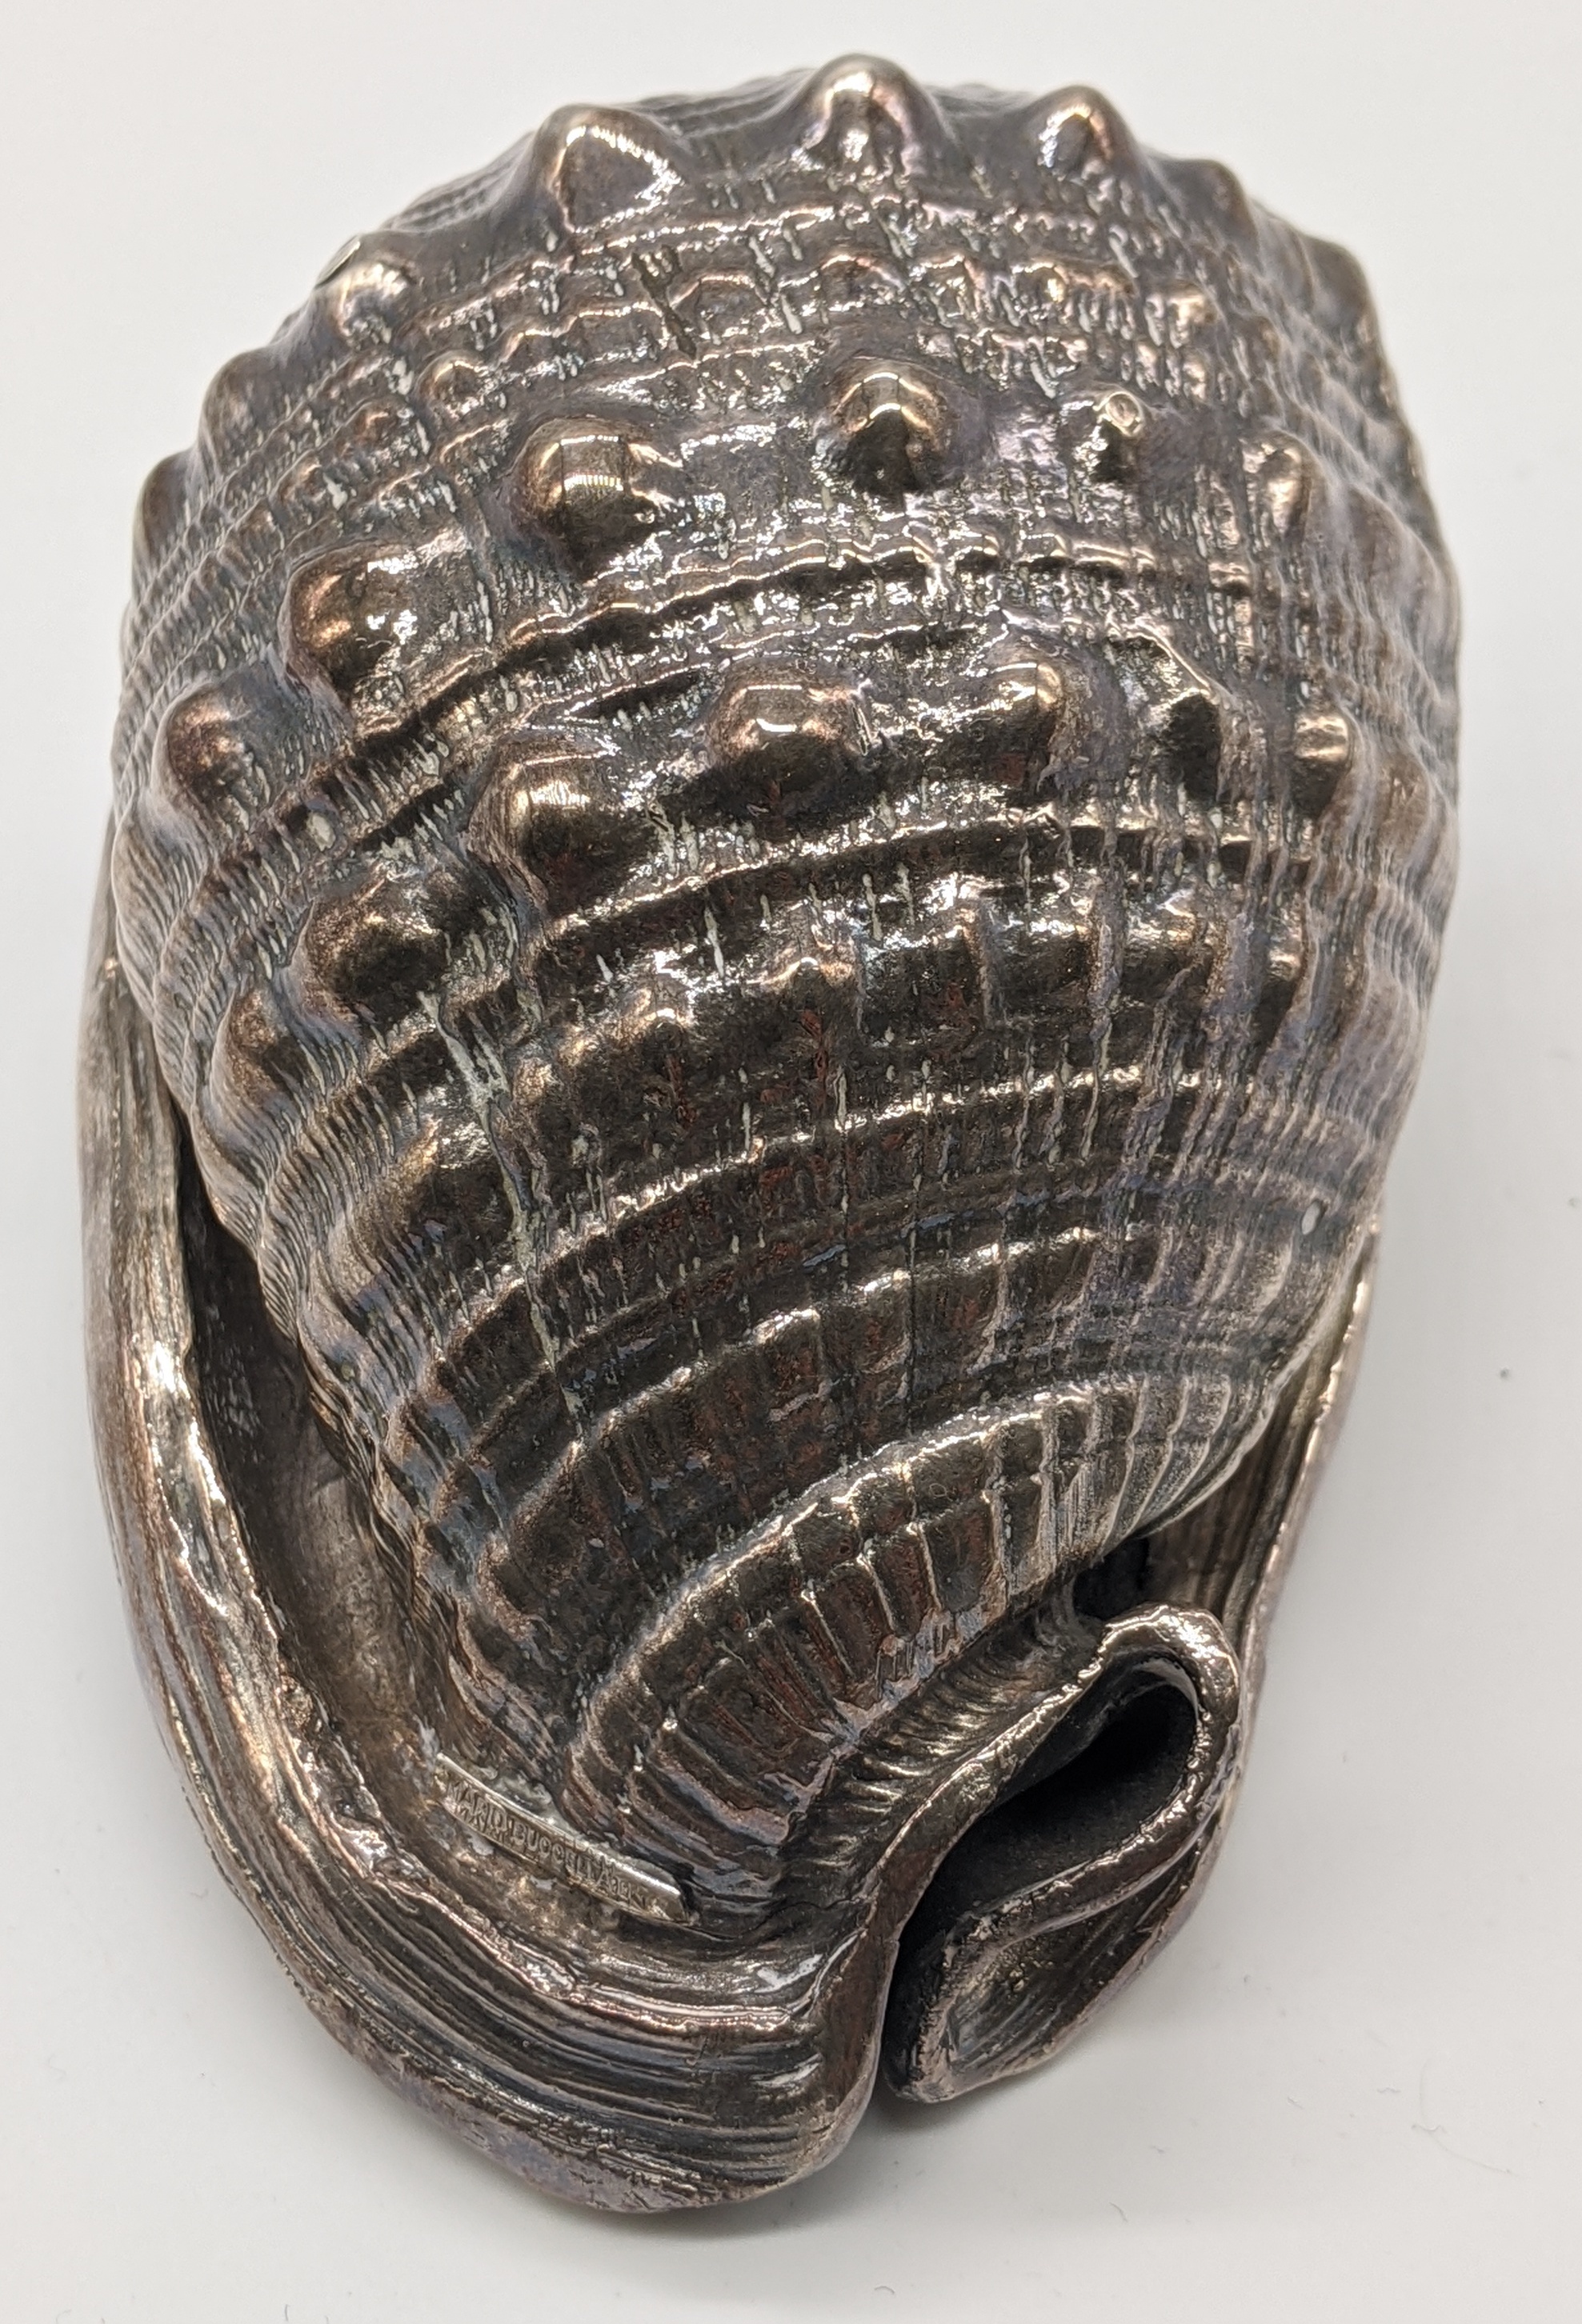 A silver coated conch shell by Mario Buccellati, H.5.5cm L.11cm W.7cm - Image 2 of 5